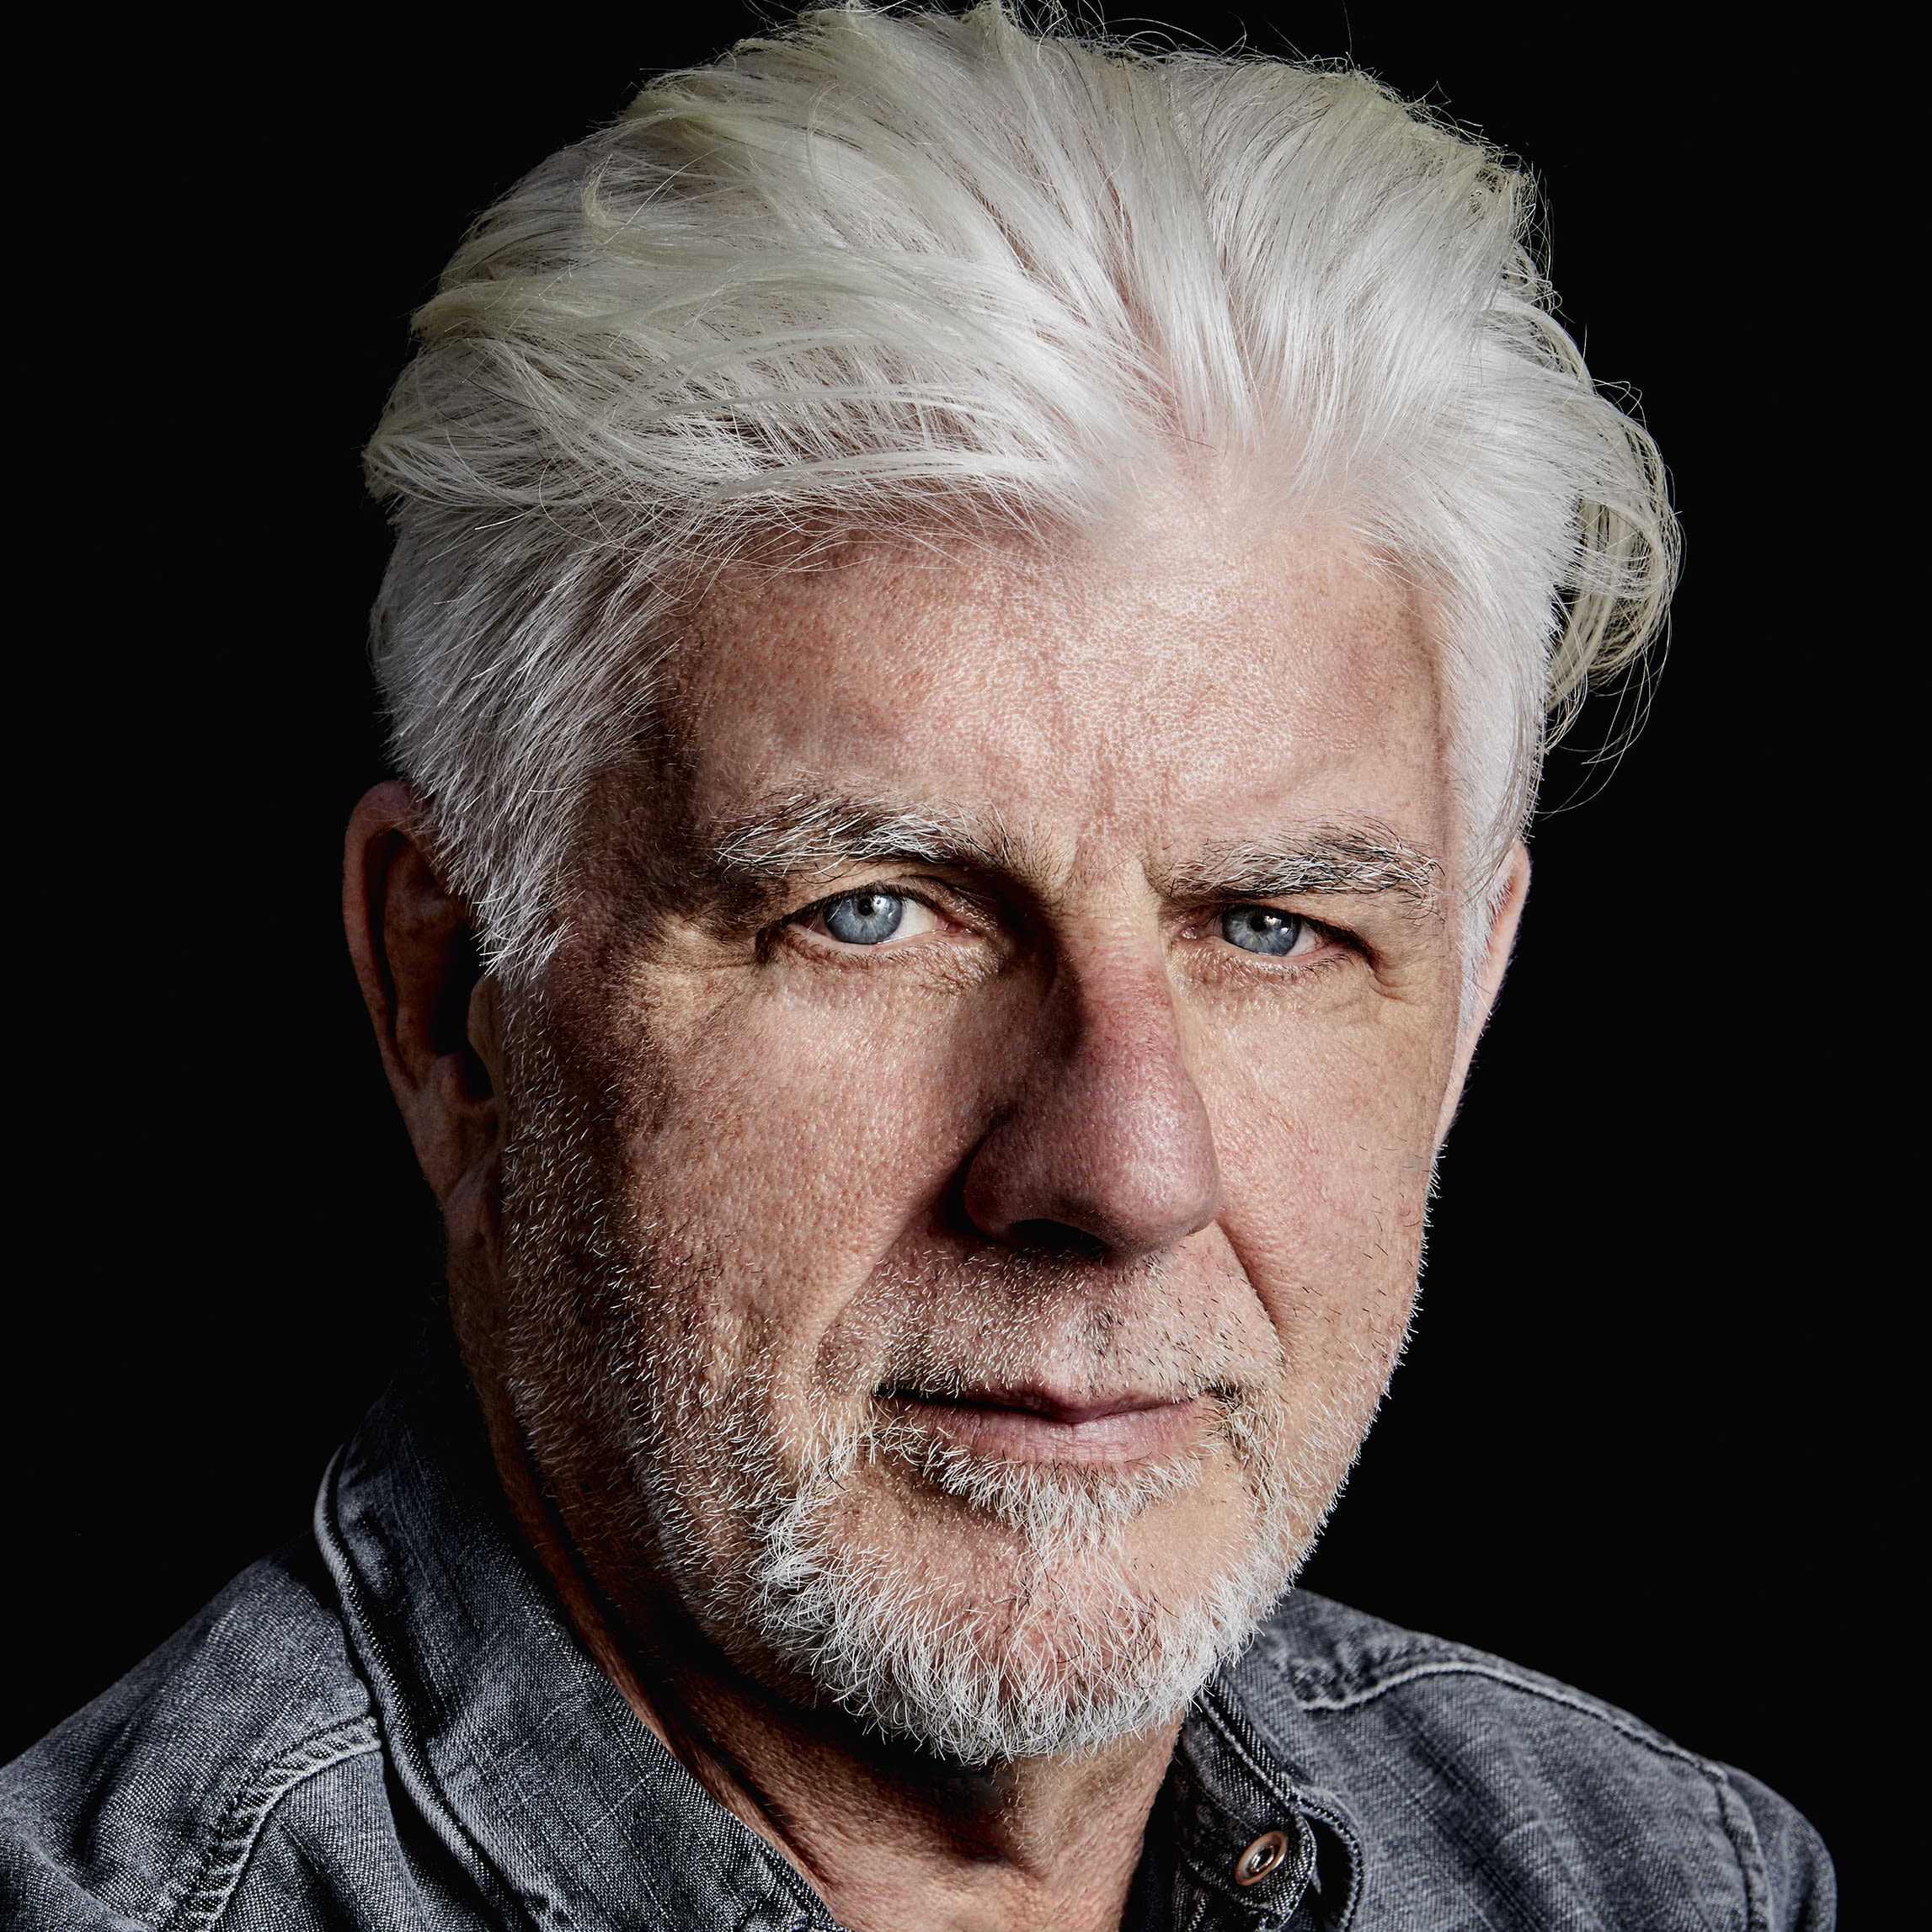 With age and sobriety, Michael McDonald is ready to get personal